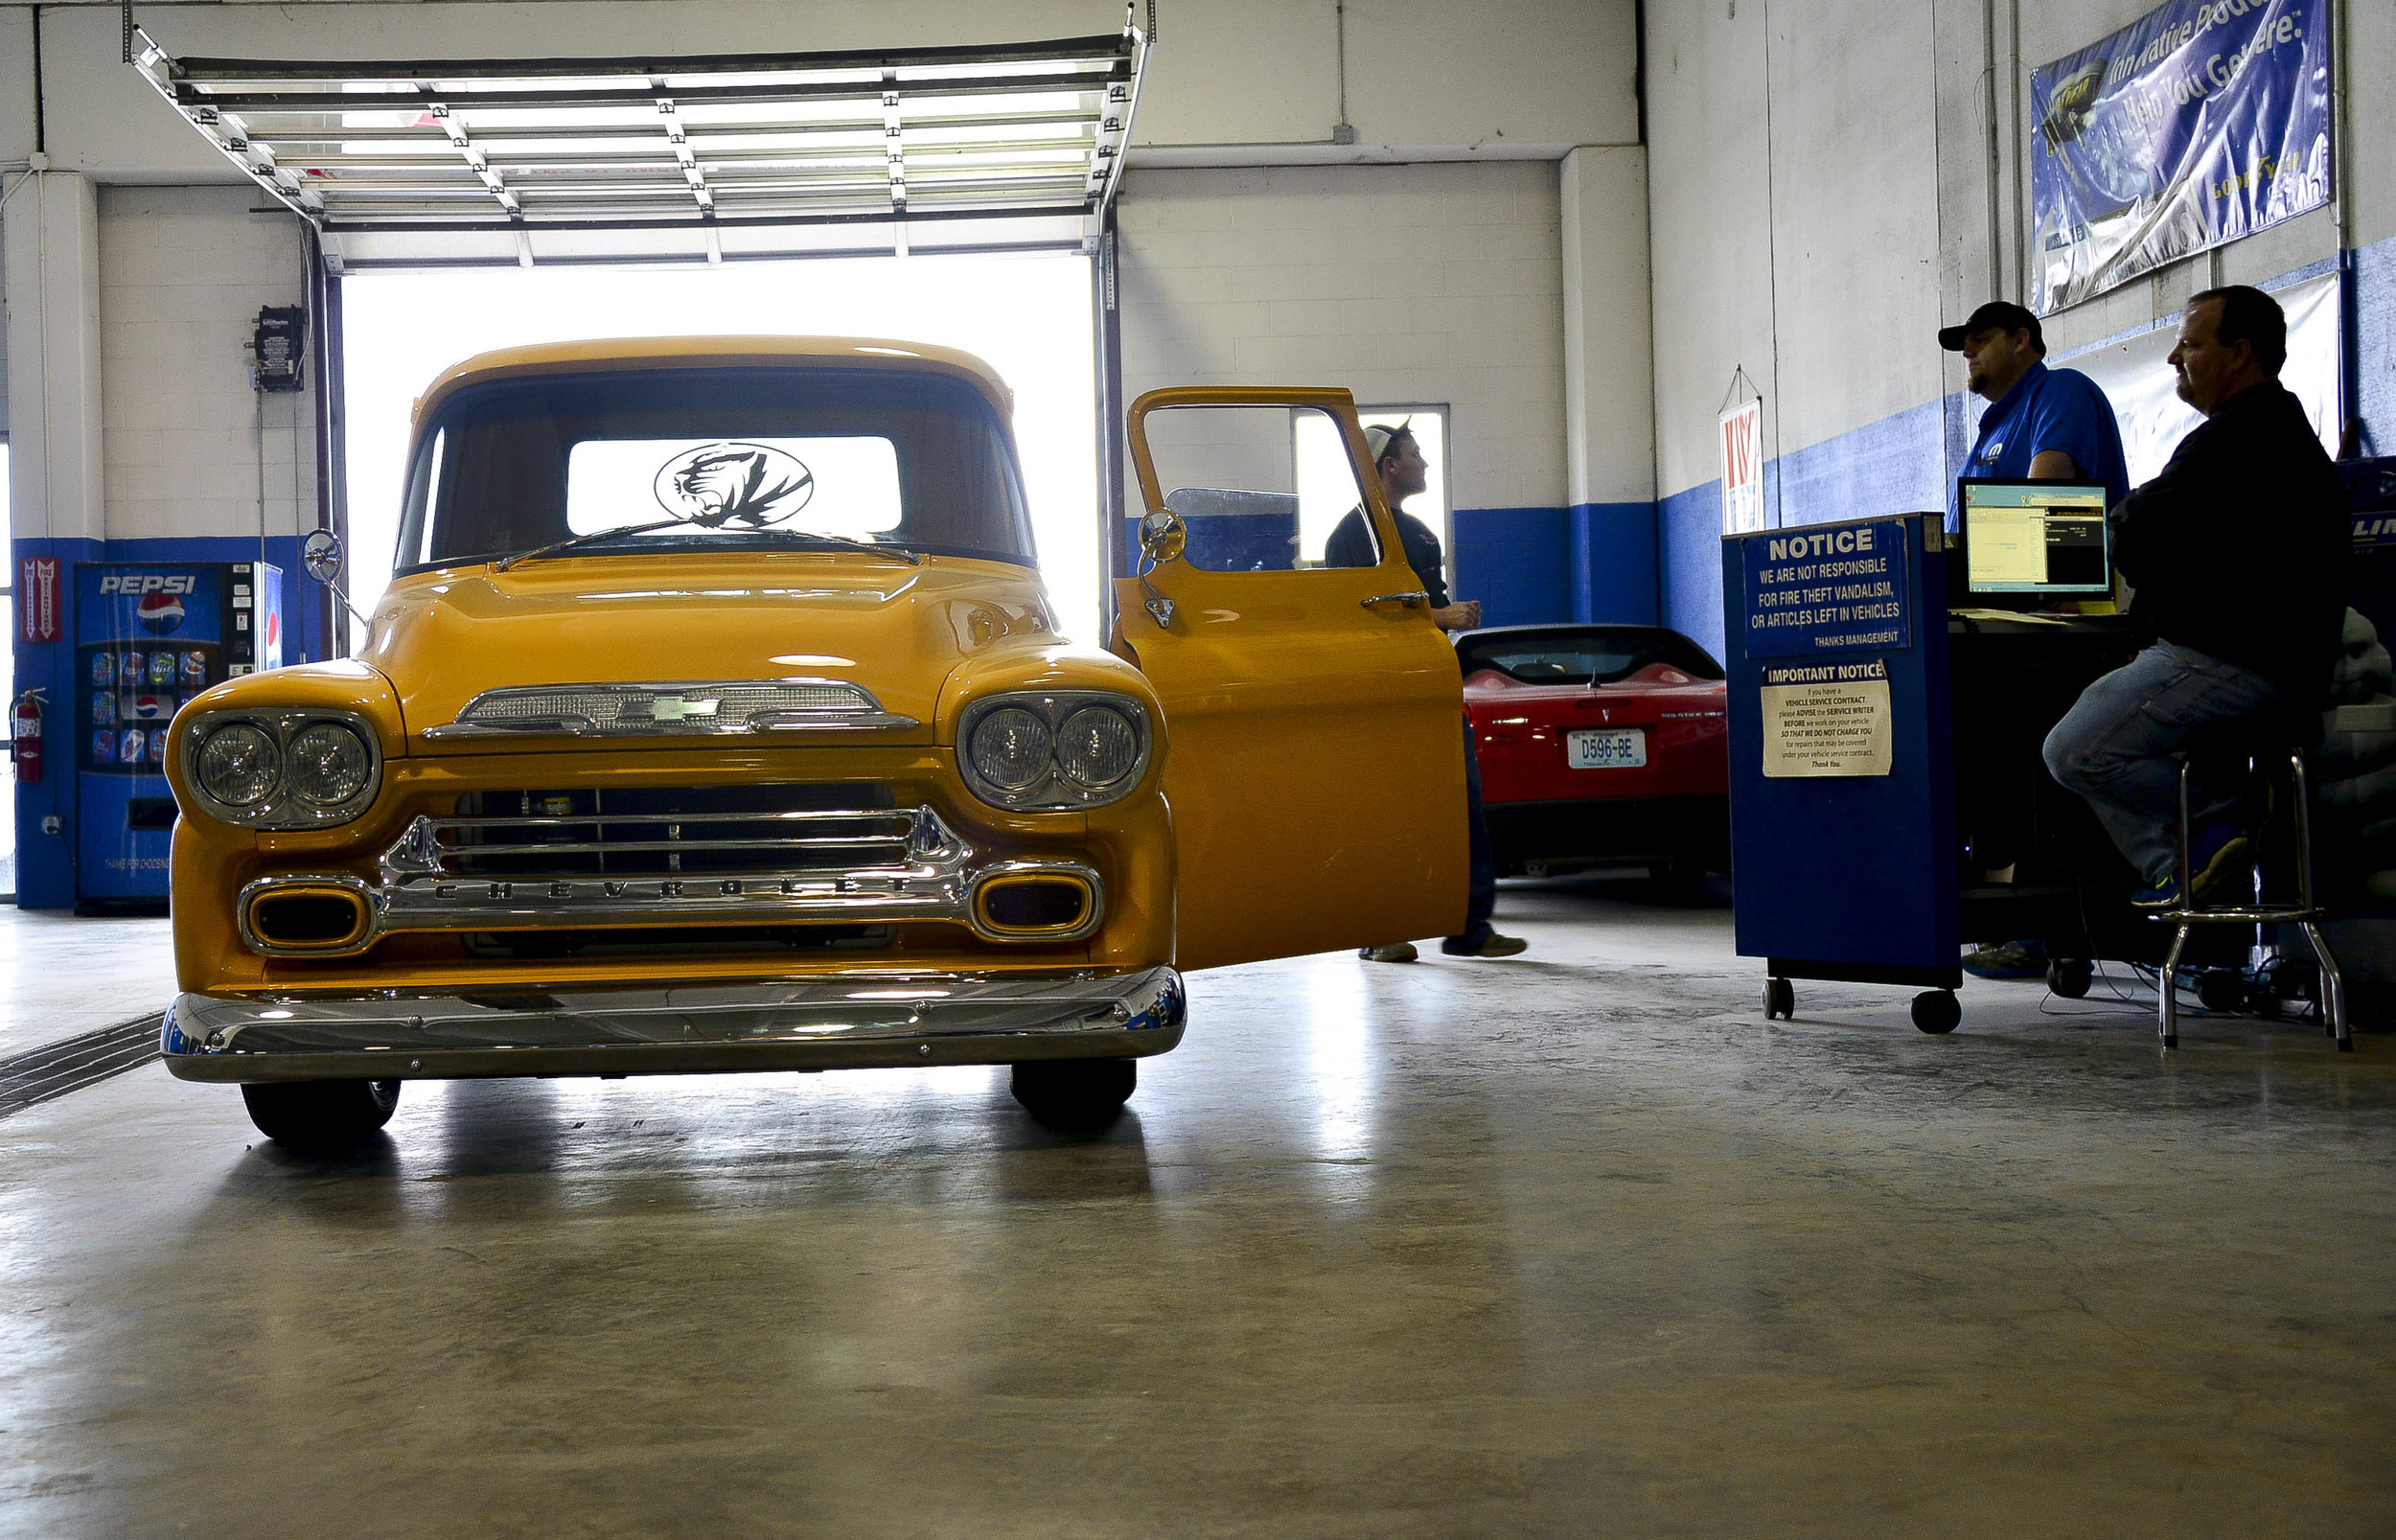   Teel takes a 46’ Chevy Mizzou-themed pickup to get inspected. The project took eight months and was for Roger Gregory, a local farmer and his son, Kurtis Gregory, a retired MU football player. “She purrs like a little kitten.” Teel said.  